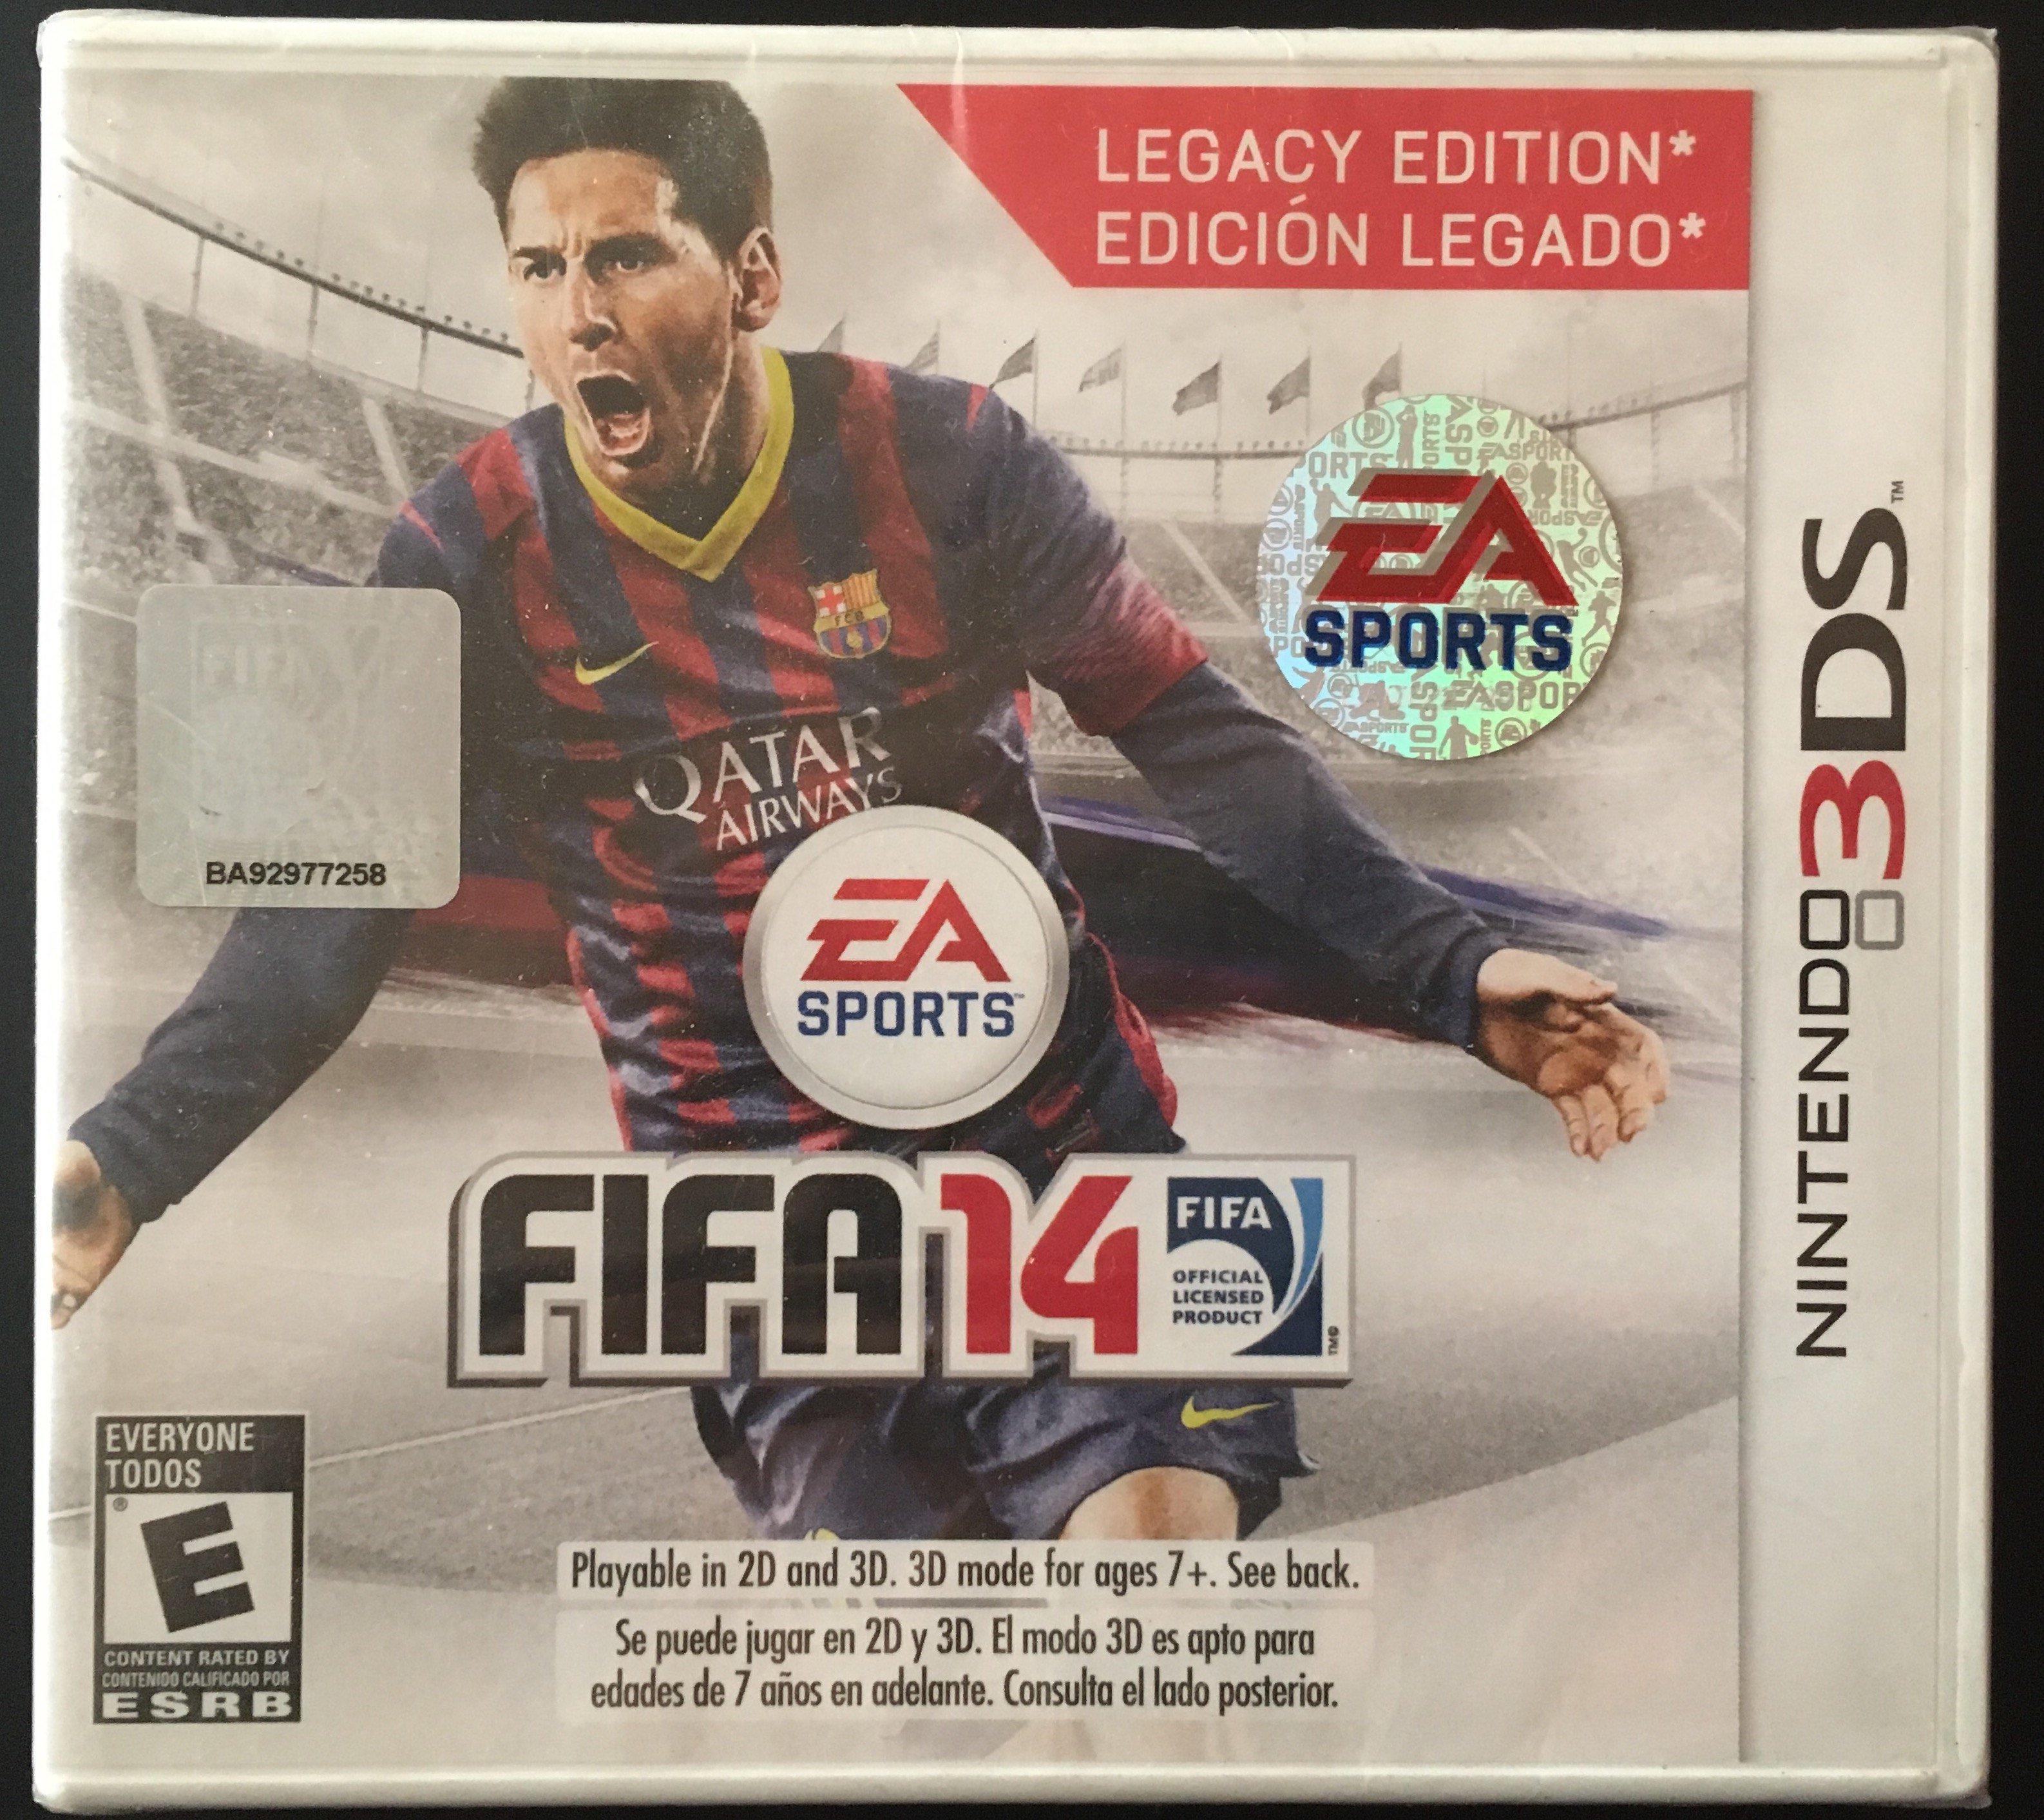 FIFA 14 3DS US Version - rarest 3DS game? | GBAtemp.net - The Independent  Video Game Community